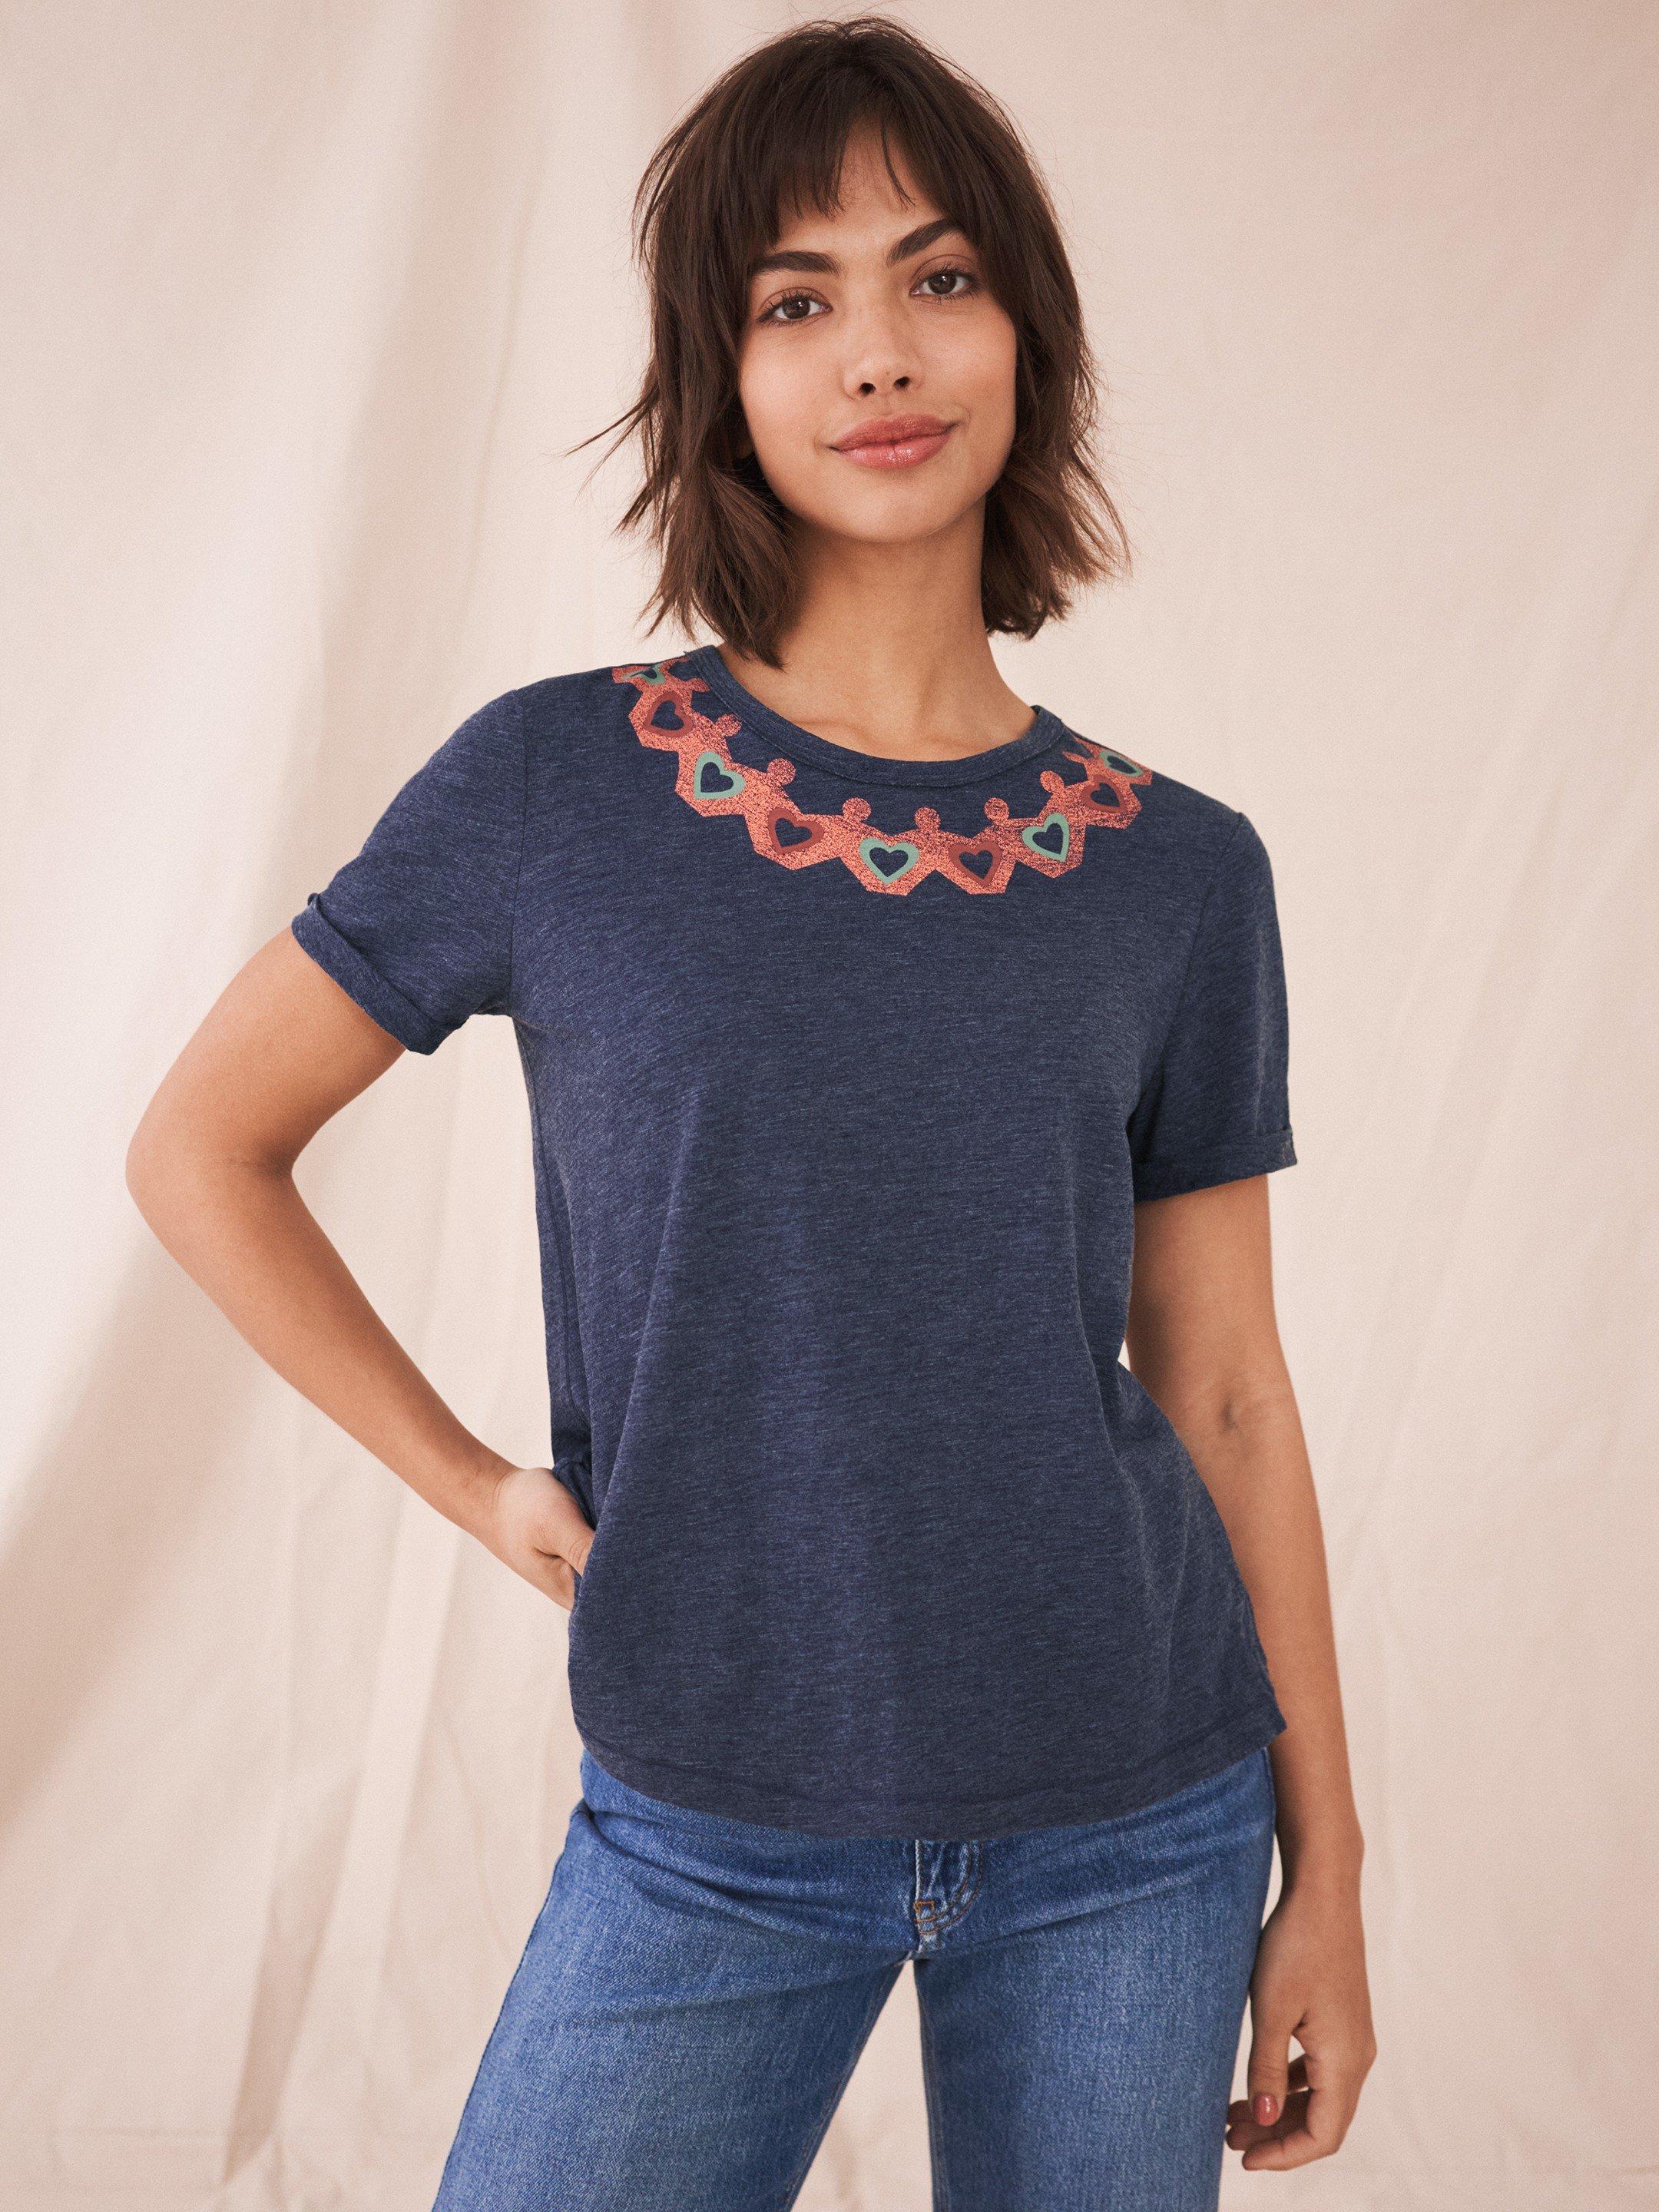 Home start a Hug Was Here Tee in NAVY MULTI - MODEL FRONT